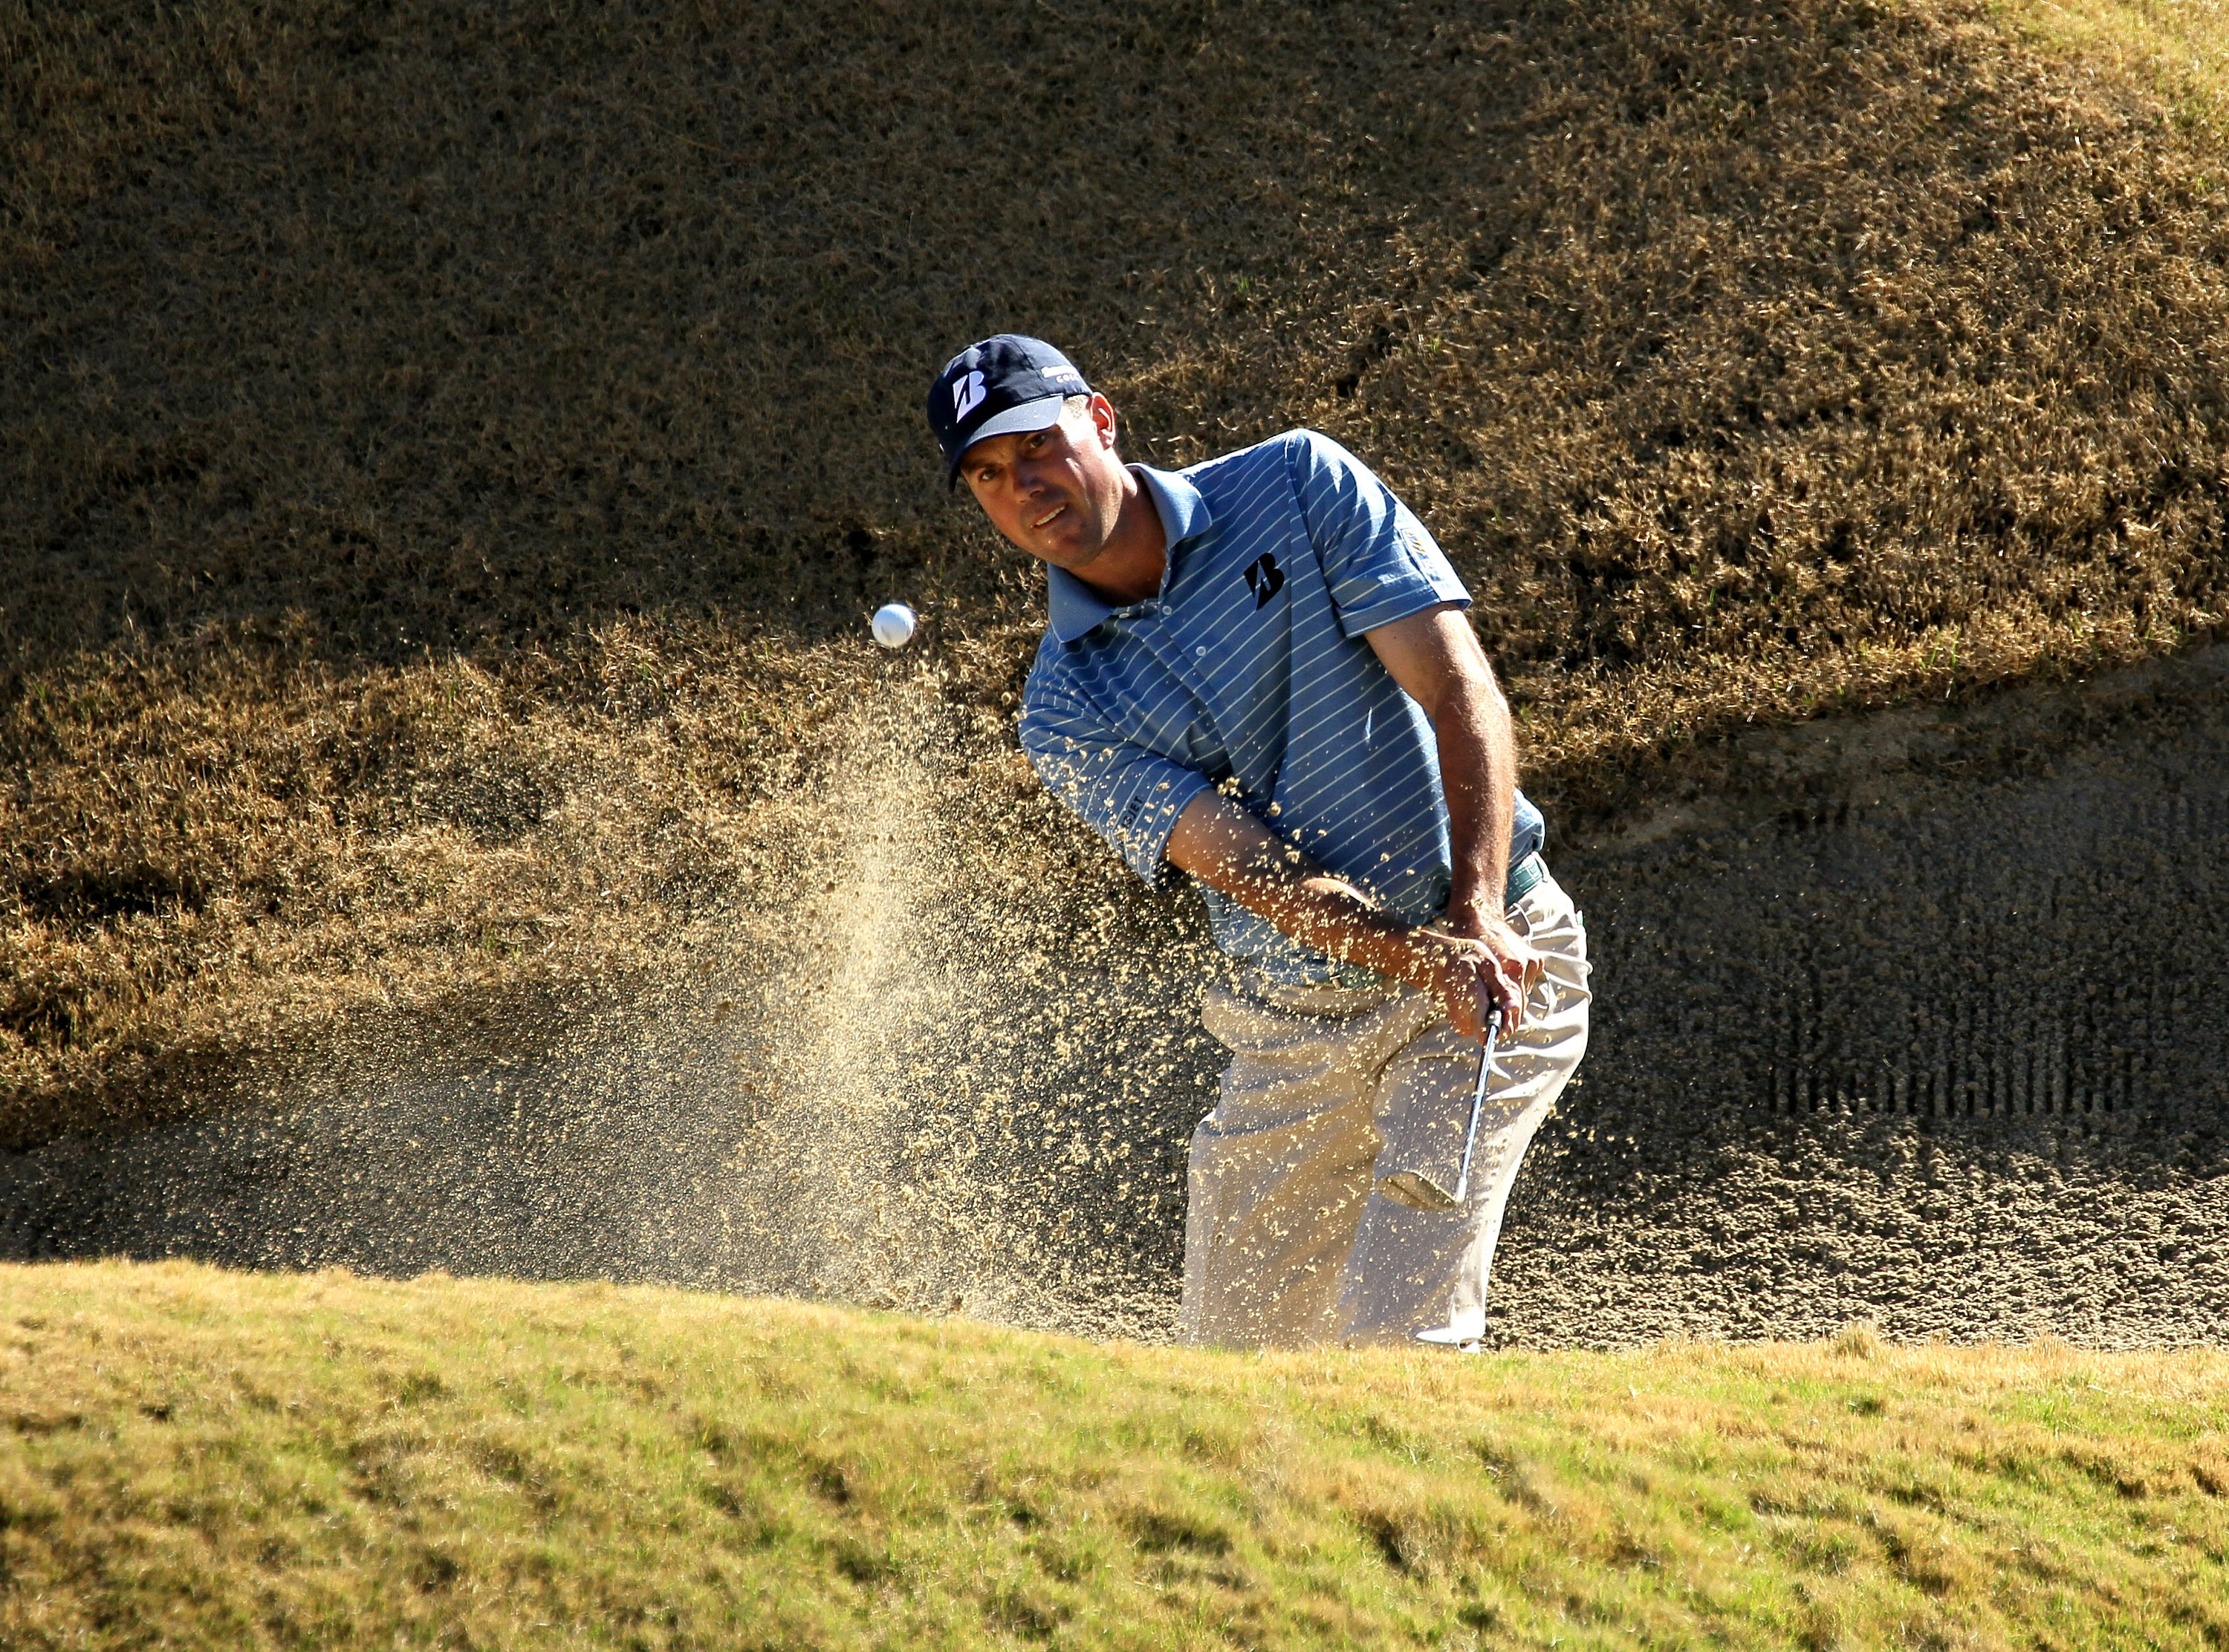 LA QUINTA, CA - JANUARY 21:  Matt Kuchar hits out of a bunker on the 17th hole during round three of the Bob Hope Classic at the Nicklaus Private Course at PGA West on January 21, 2011 in La Quinta, California. (Photo by Stephen Dunn/Getty Images)